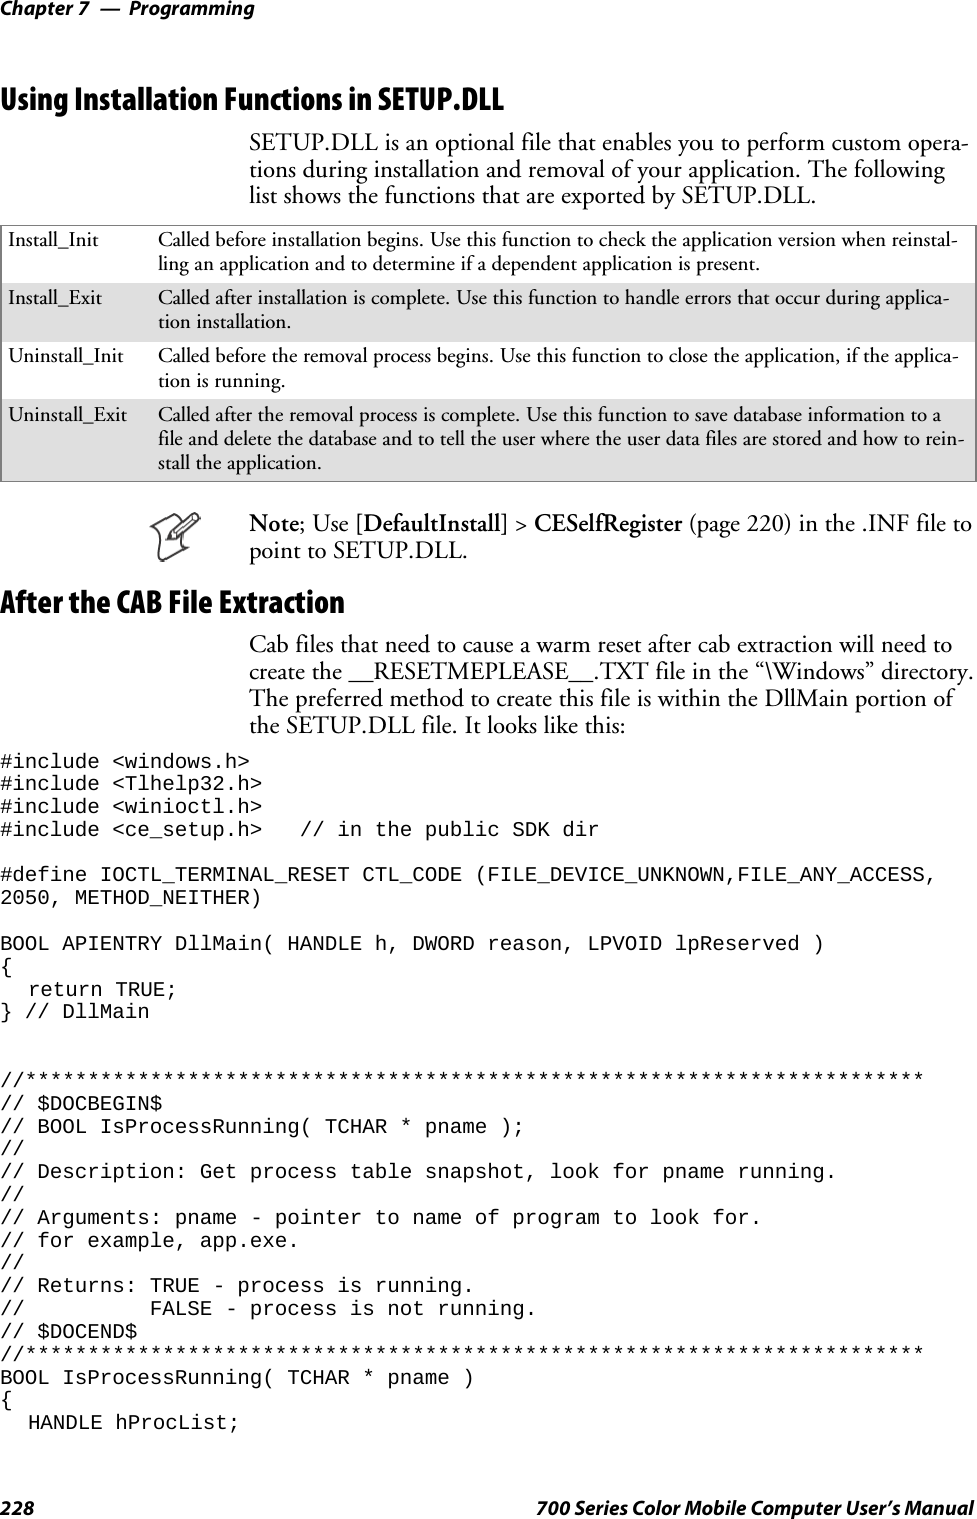 ProgrammingChapter —7228 700 Series Color Mobile Computer User’s ManualUsing Installation Functions in SETUP.DLLSETUP.DLL is an optional file that enables you to perform custom opera-tions during installation and removal of your application. The followinglist shows the functions that are exported by SETUP.DLL.Install_Init Called before installation begins. Use this function to check the application version when reinstal-ling an application and to determine if a dependent application is present.Install_Exit Called after installation is complete. Use this function to handle errors that occur during applica-tion installation.Uninstall_Init Called before the removal process begins. Use this function to close the application, if the applica-tion is running.Uninstall_Exit Called after the removal process is complete. Use this function to save database information to afile and delete the database and to tell the user where the user data files are stored and how to rein-stall the application.Note;Use[DefaultInstall] &gt;CESelfRegister (page 220) in the .INF file topoint to SETUP.DLL.After the CAB File ExtractionCab files that need to cause a warm reset after cab extraction will need tocreate the __RESETMEPLEASE__.TXT file in the “\Windows” directory.The preferred method to create this file is within the DllMain portion oftheSETUP.DLLfile.Itlookslikethis:#include &lt;windows.h&gt;#include &lt;Tlhelp32.h&gt;#include &lt;winioctl.h&gt;#include &lt;ce_setup.h&gt; // in the public SDK dir#define IOCTL_TERMINAL_RESET CTL_CODE (FILE_DEVICE_UNKNOWN,FILE_ANY_ACCESS,2050, METHOD_NEITHER)BOOL APIENTRY DllMain( HANDLE h, DWORD reason, LPVOID lpReserved ){return TRUE;} // DllMain//************************************************************************// $DOCBEGIN$// BOOL IsProcessRunning( TCHAR * pname );//// Description: Get process table snapshot, look for pname running.//// Arguments: pname - pointer to name of program to look for.// for example, app.exe.//// Returns: TRUE - process is running.// FALSE - process is not running.// $DOCEND$//************************************************************************BOOL IsProcessRunning( TCHAR * pname ){HANDLE hProcList;